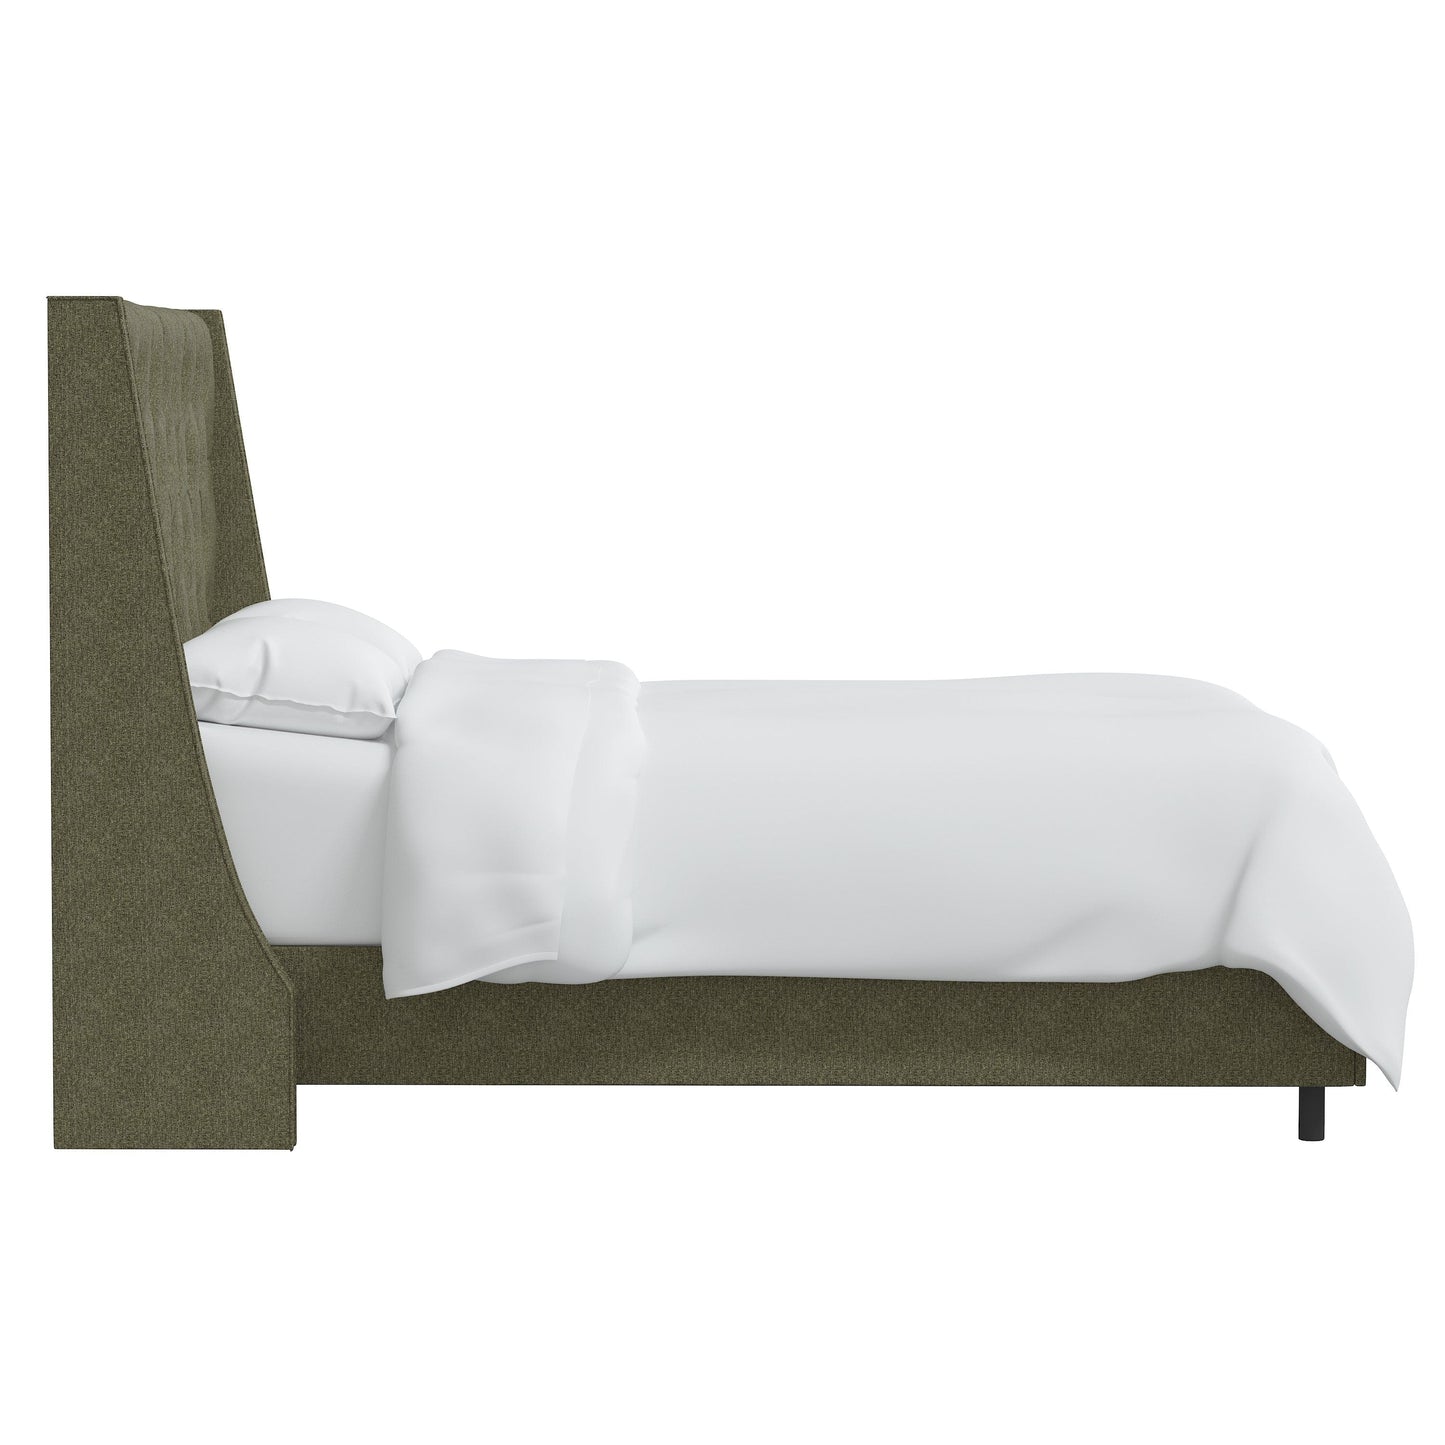 Skyline Furniture King Loomis Tufted Wingback Bed in Orly Army